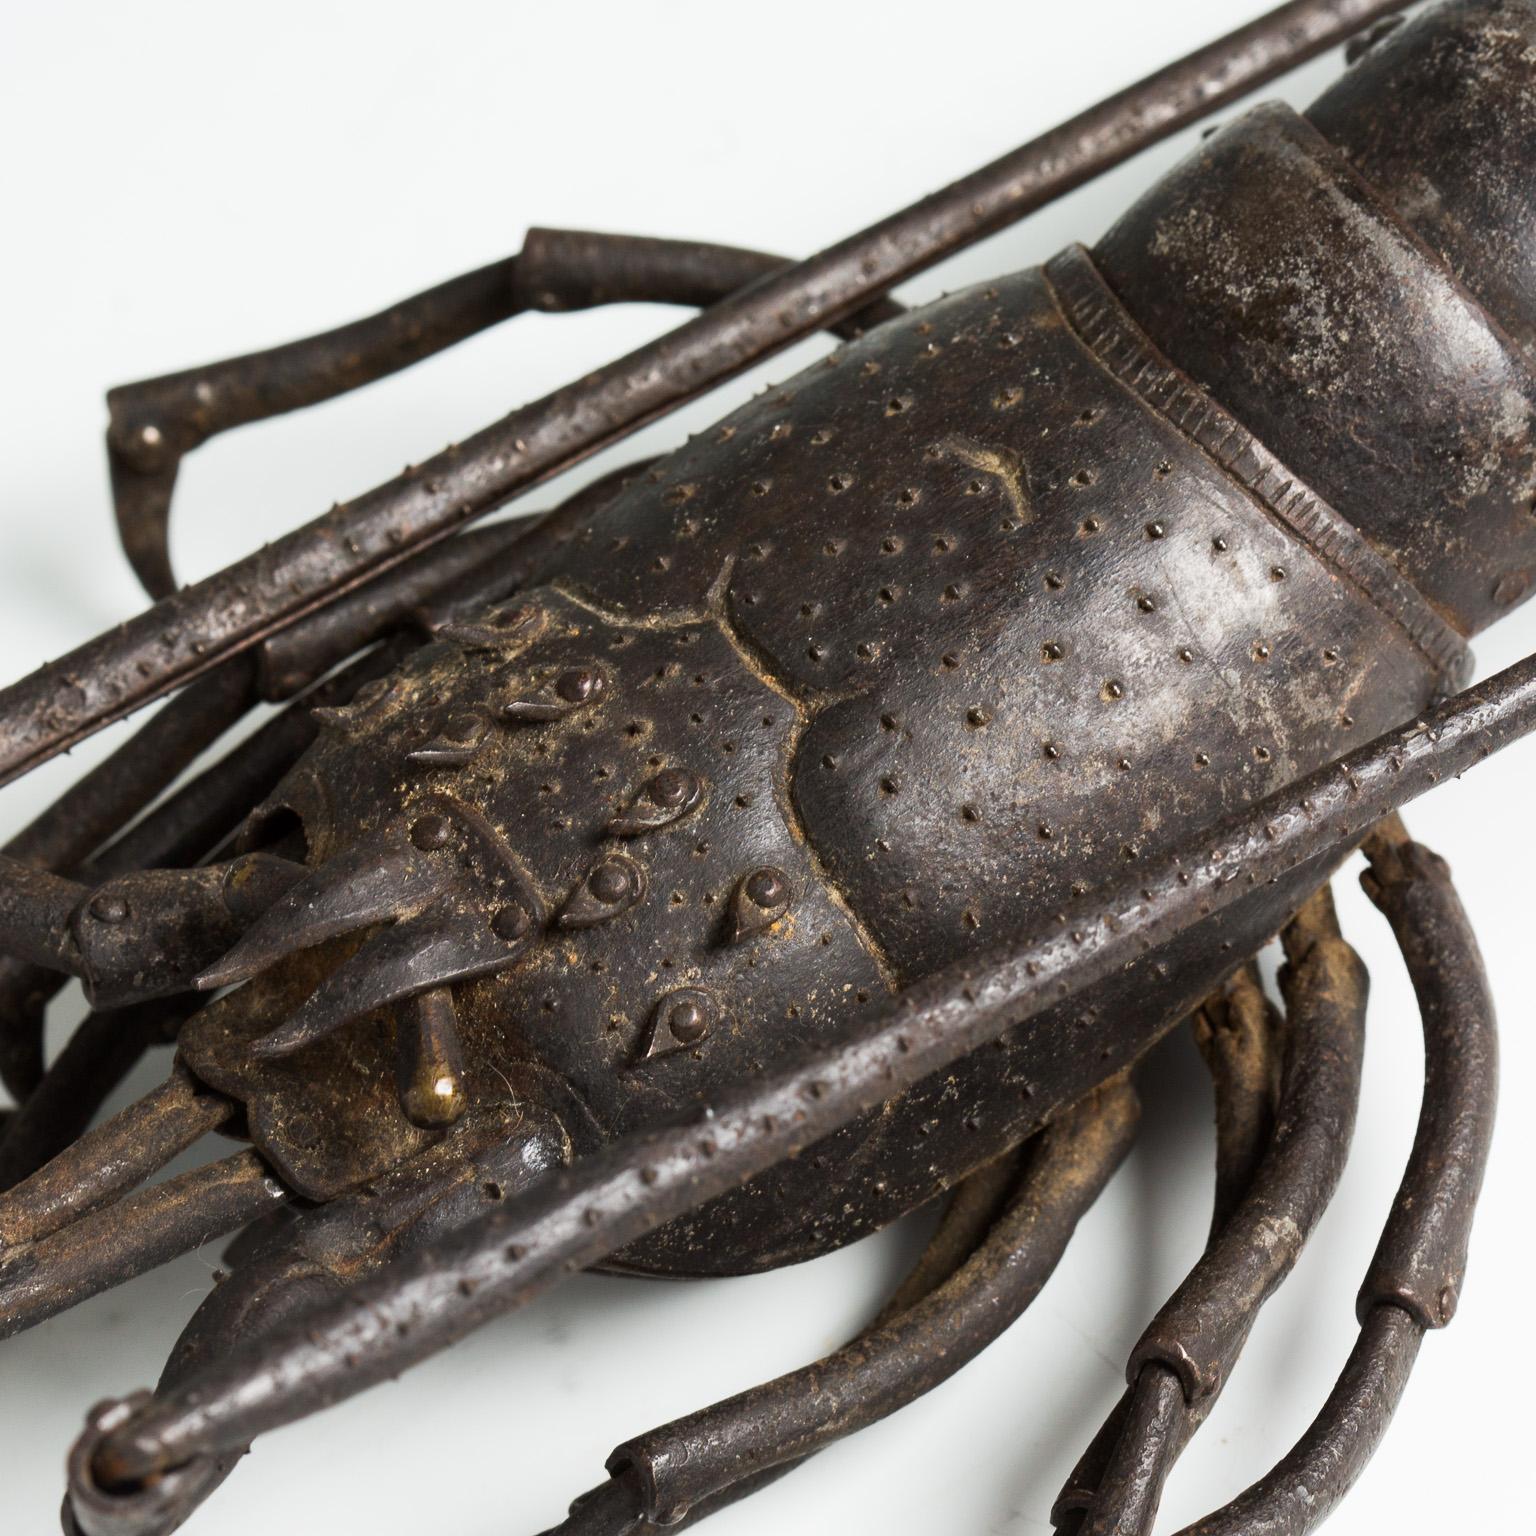 This articulated okimono represents a naturalistically rendered lobster, with fully articulated limbs, antennae, body, and tail and comes with an inscribed wood storage box.
Signed: Myochin Muneharu saku.
 